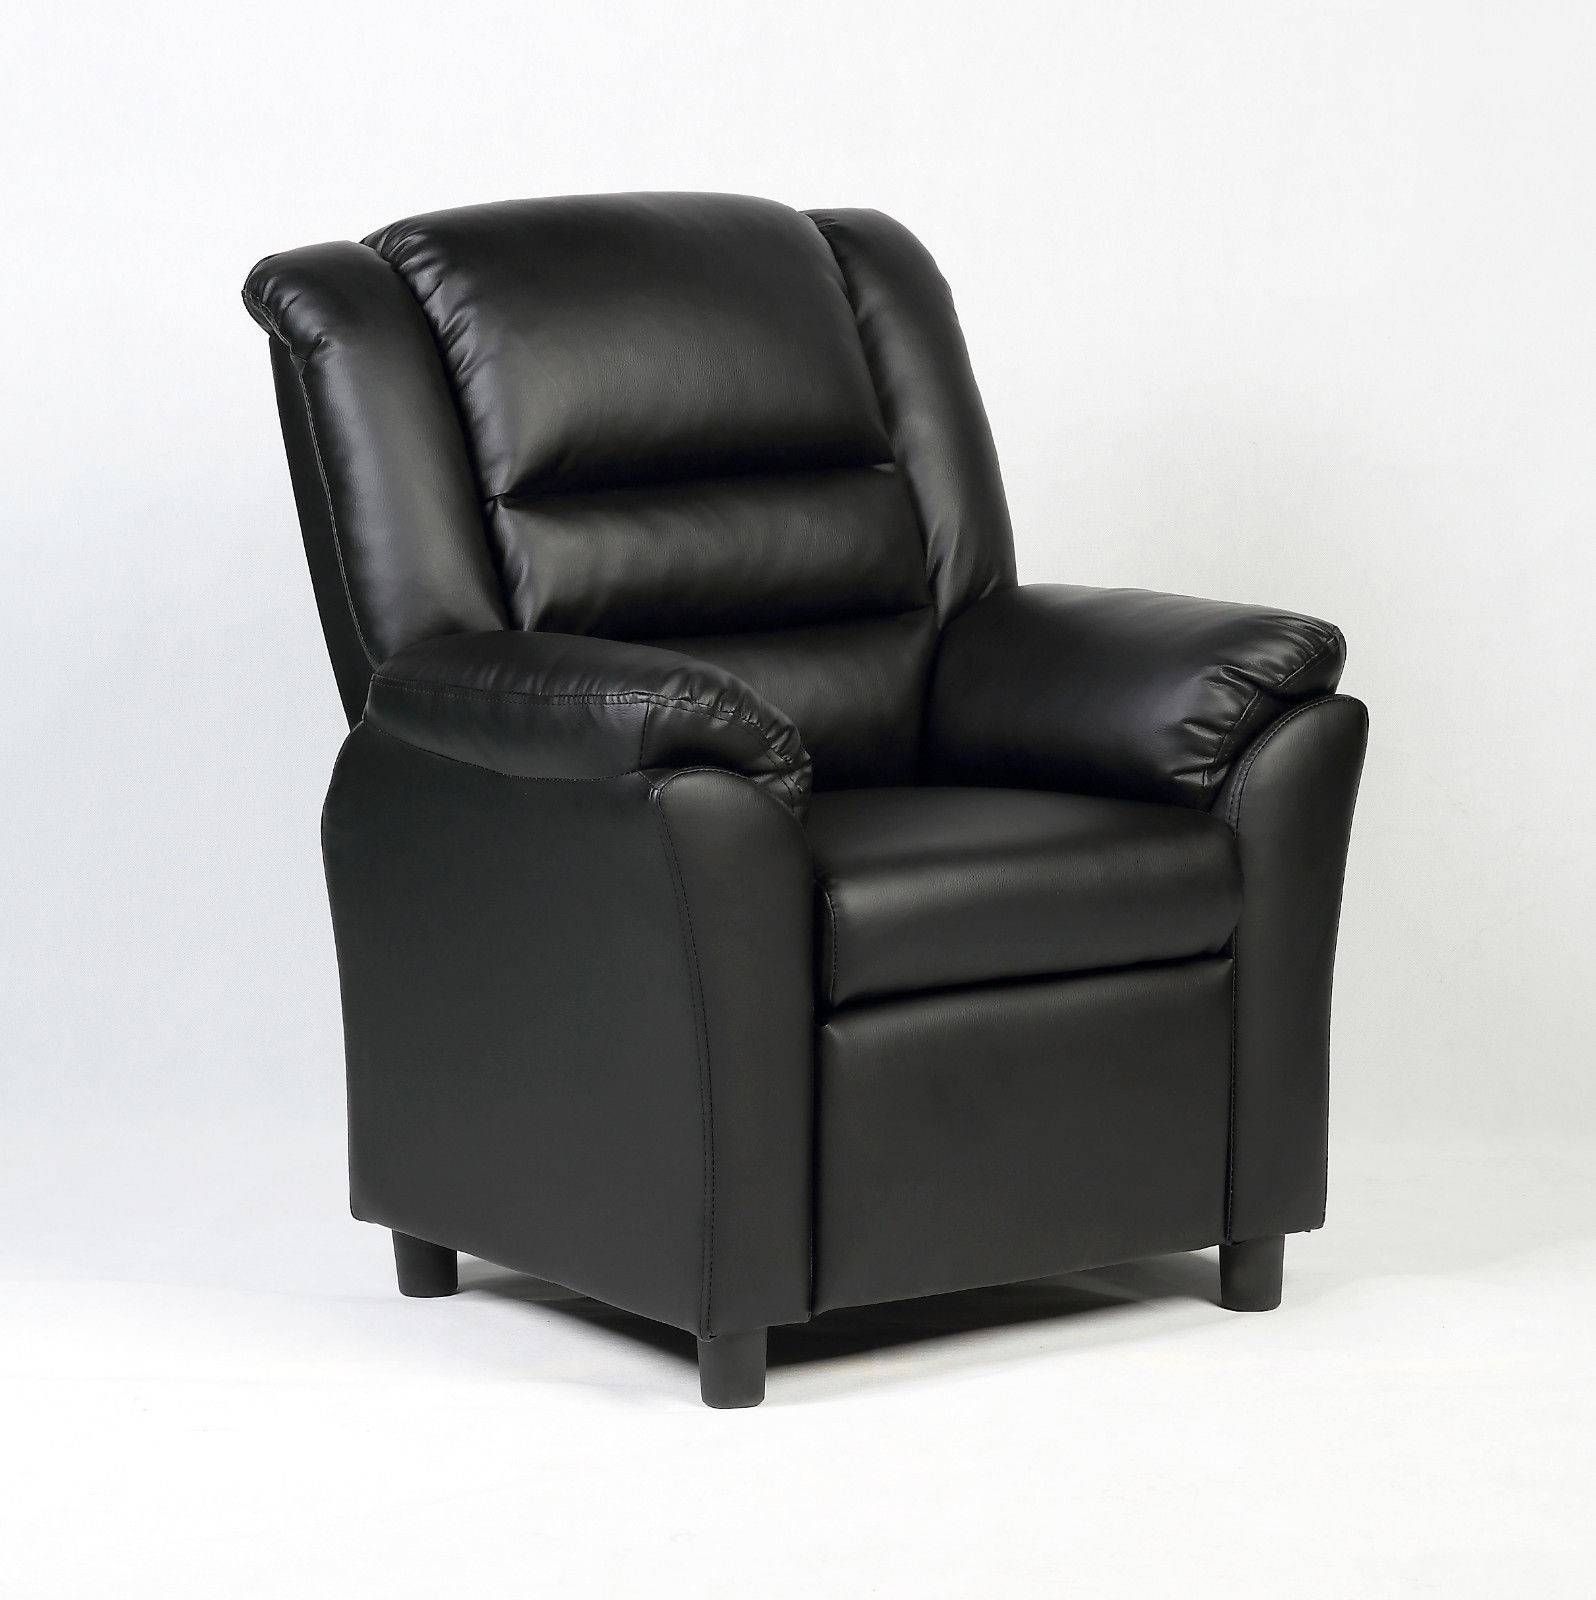 Ergonomic Kids Sofa Manual Recliner – Arm Chairs, Recliners Within Sofa Chair Recliner (View 19 of 30)